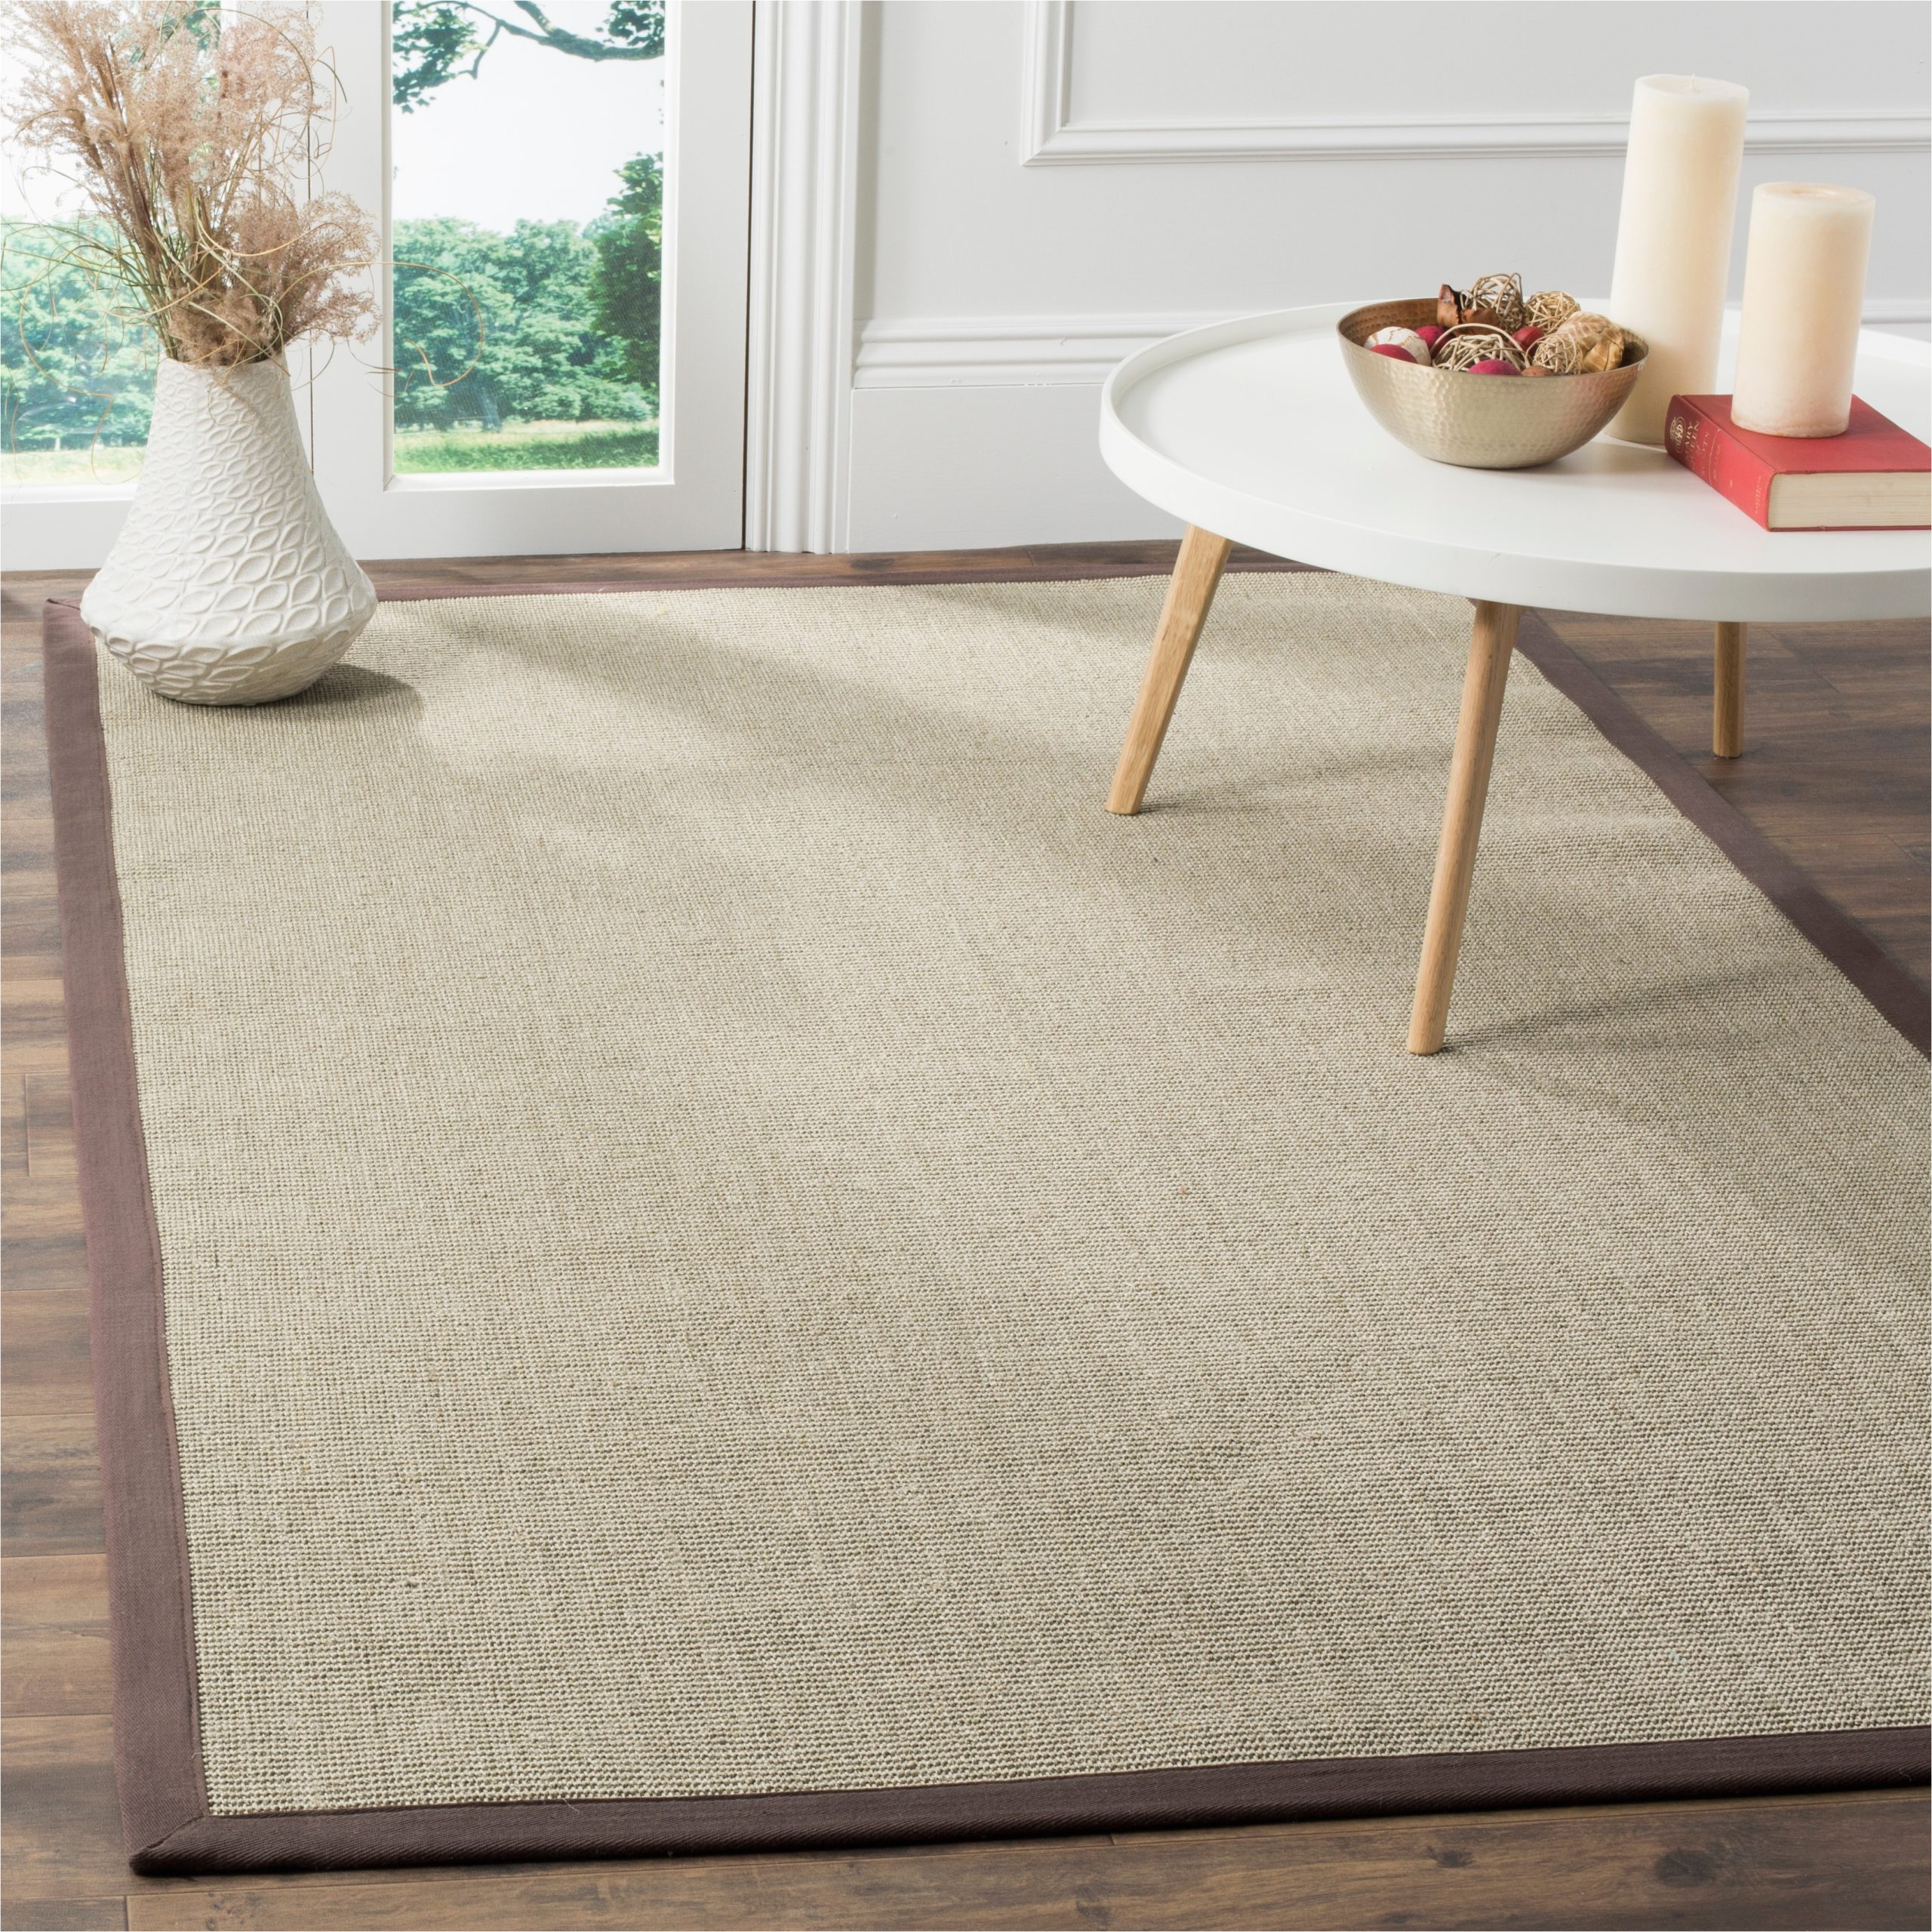 Sisal area Rugs with Borders Safavieh Casual Accent Sisal Casual Rug Overstock.com